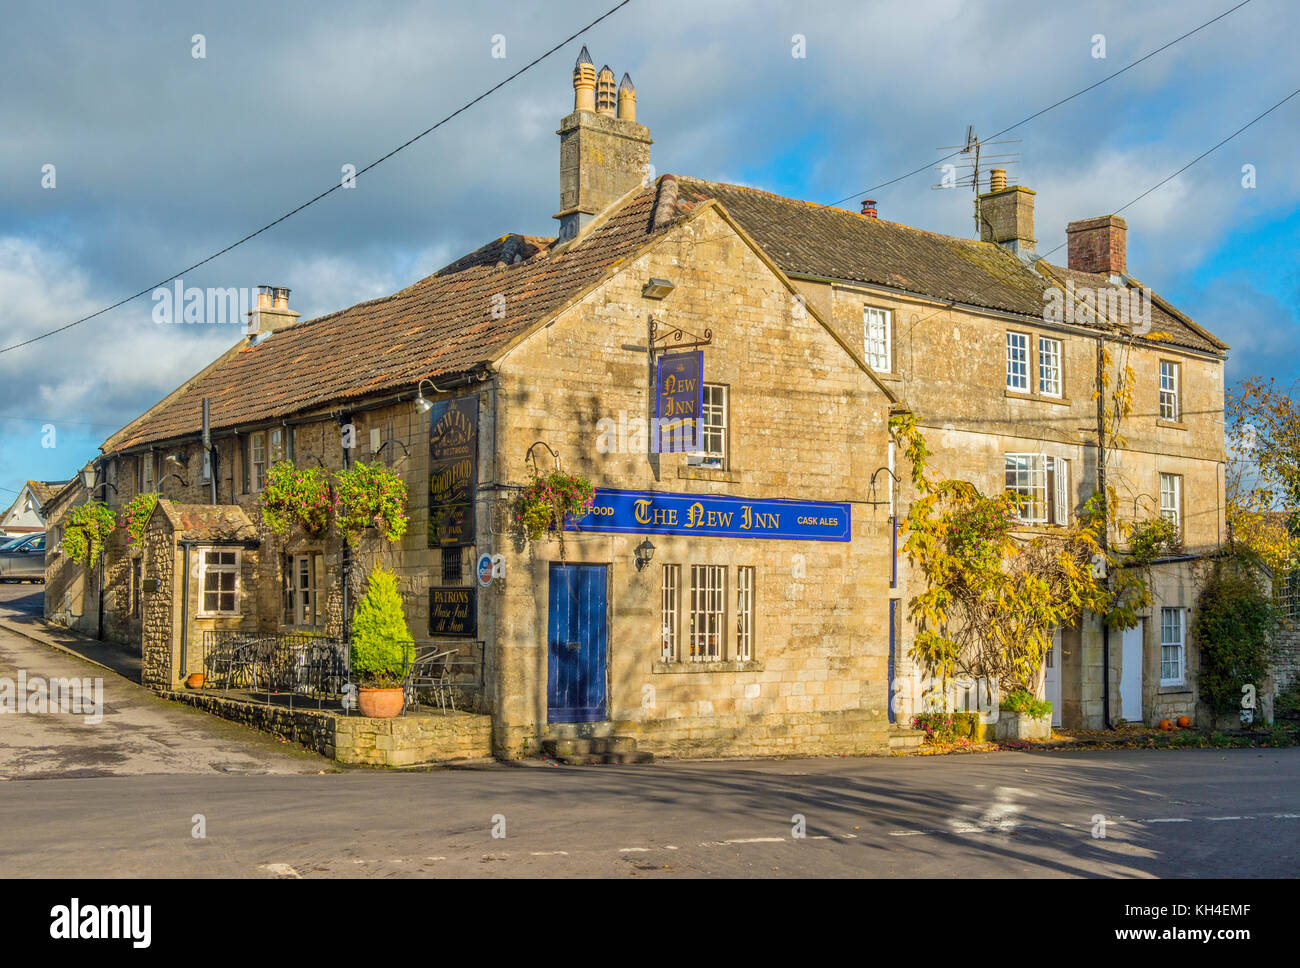 The New Inn at Lower Westwood, Bradford on Avon, Wiltshire Foto Stock